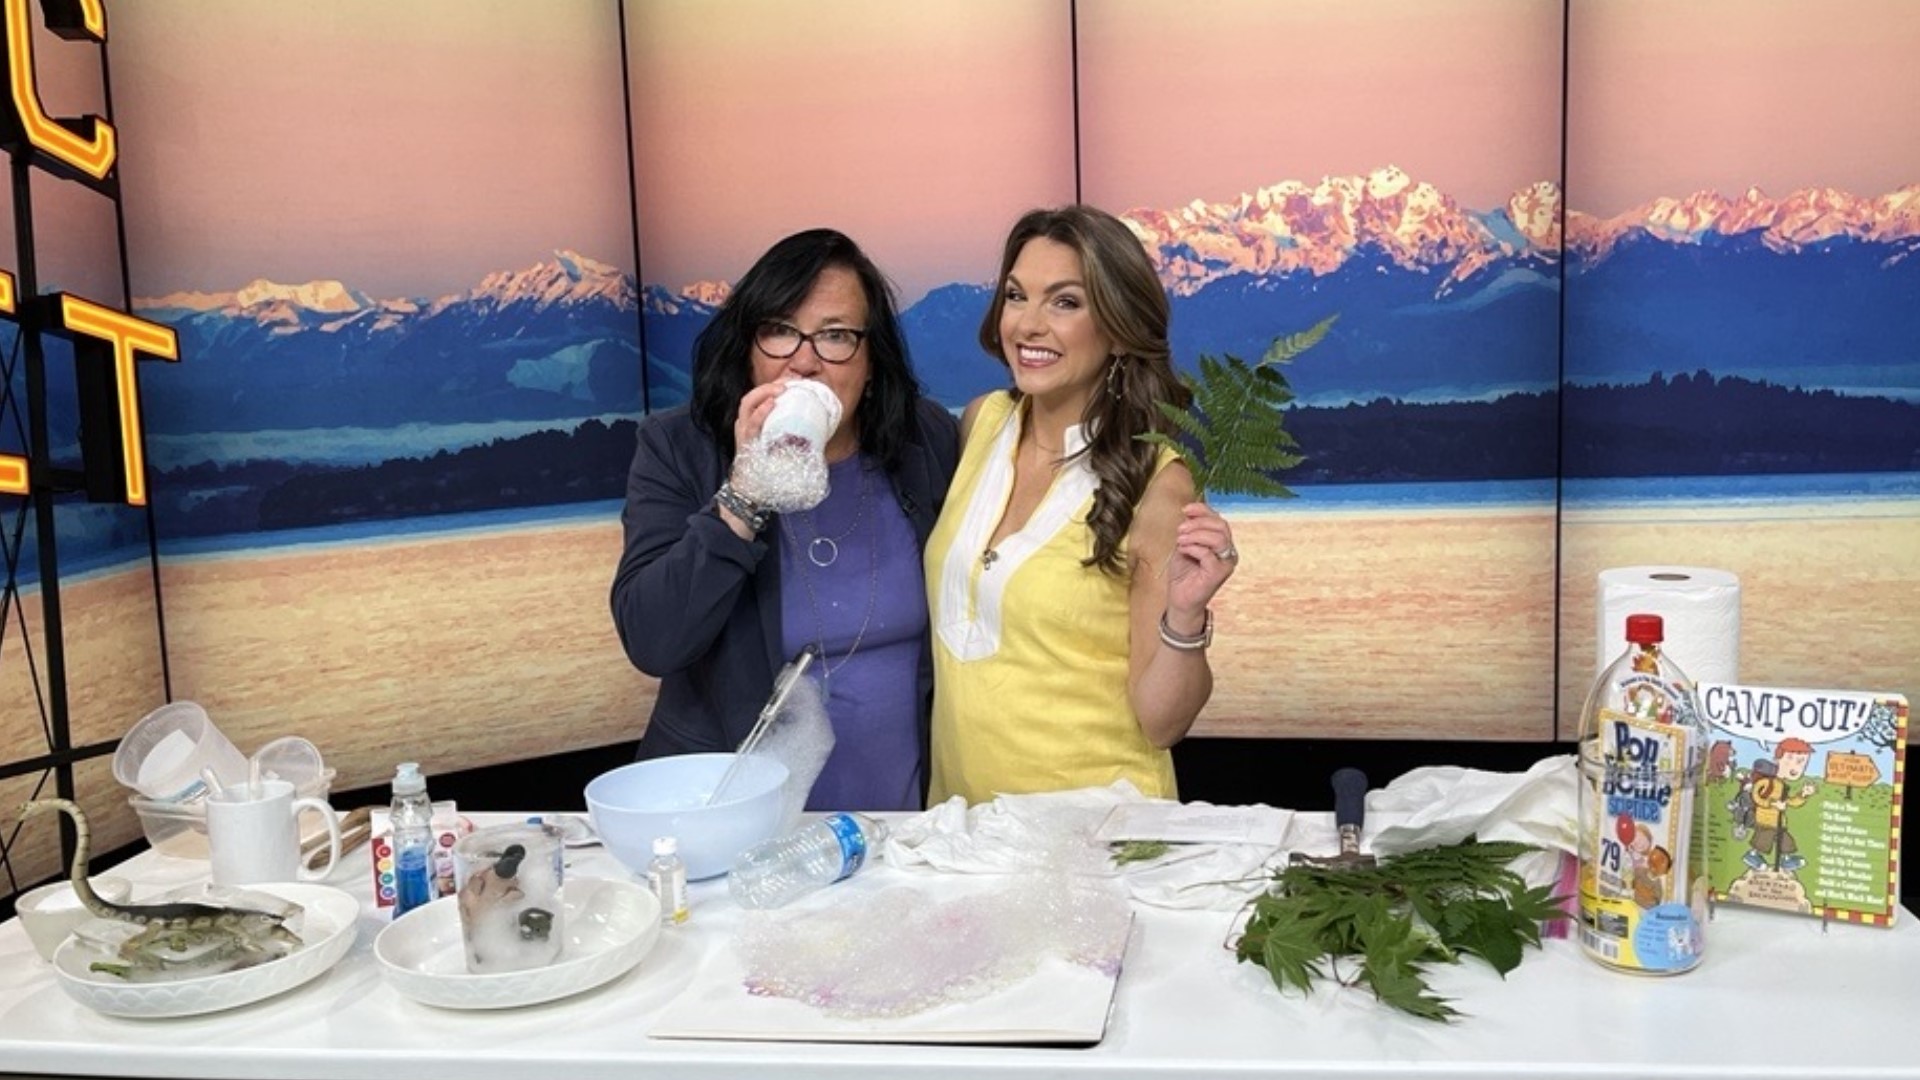 Author Lynn Brunelle shows Amity some cool science-based activities to do with your kids this summer.